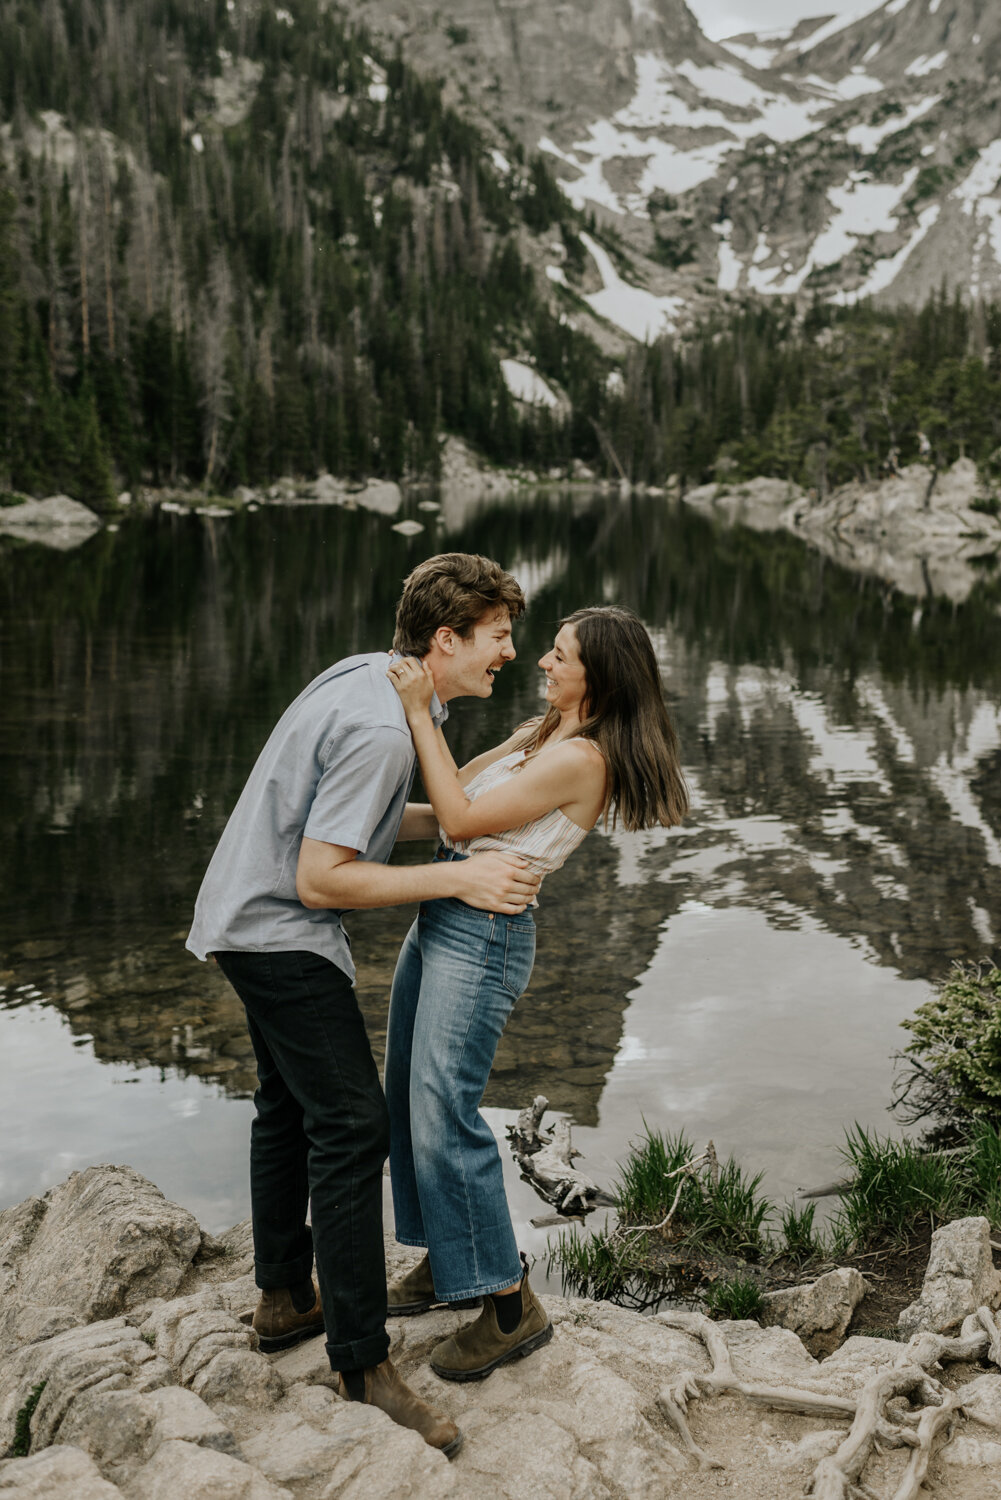 Dream Lake Engagement Photos in Rocky Mountain National Park, Colorado 